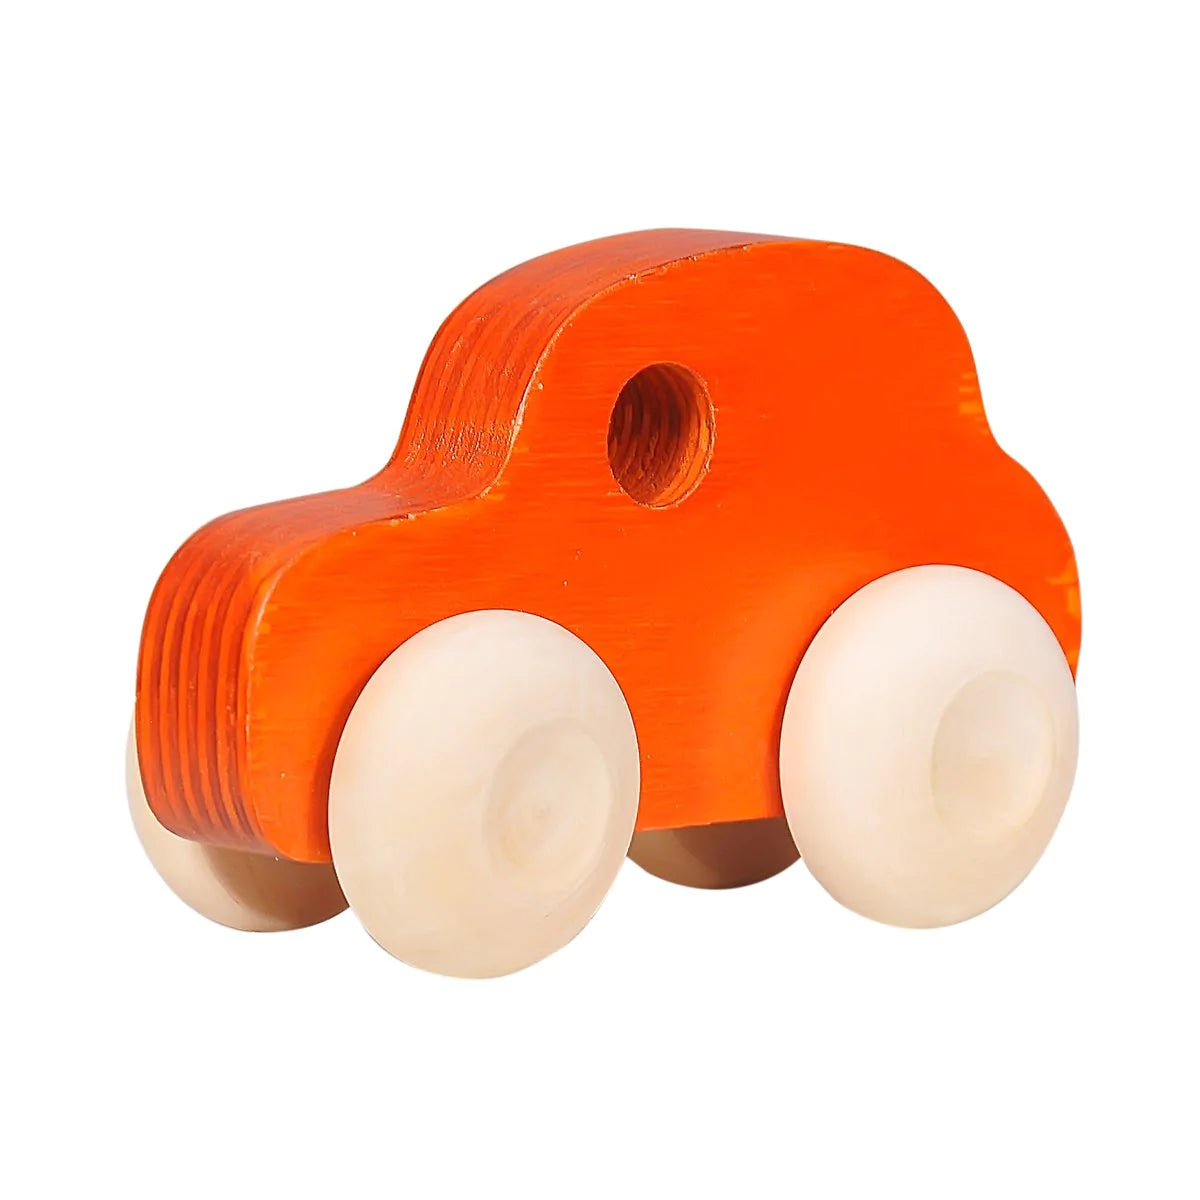 Buy Car Wooden Toy - SkilloToys.com